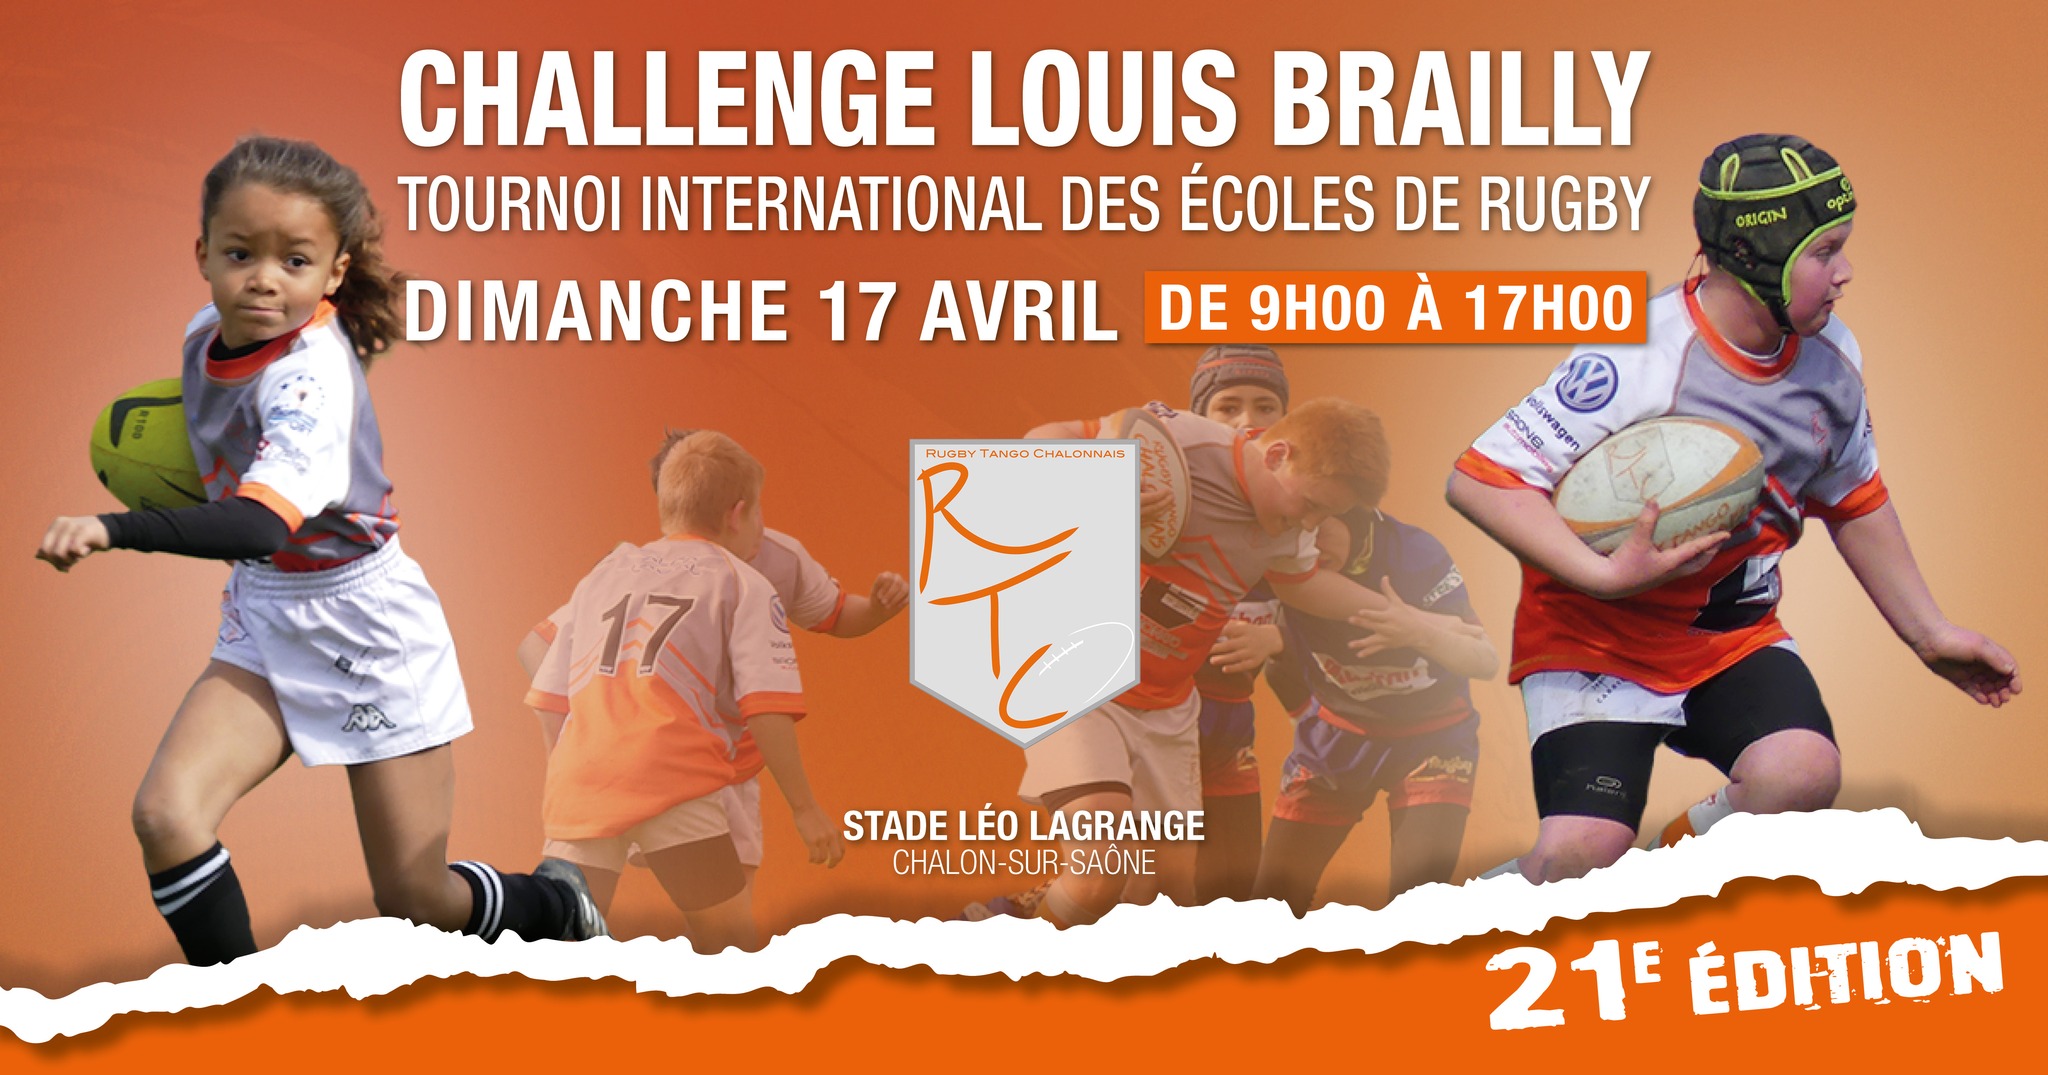 Challenge Louis Brailly